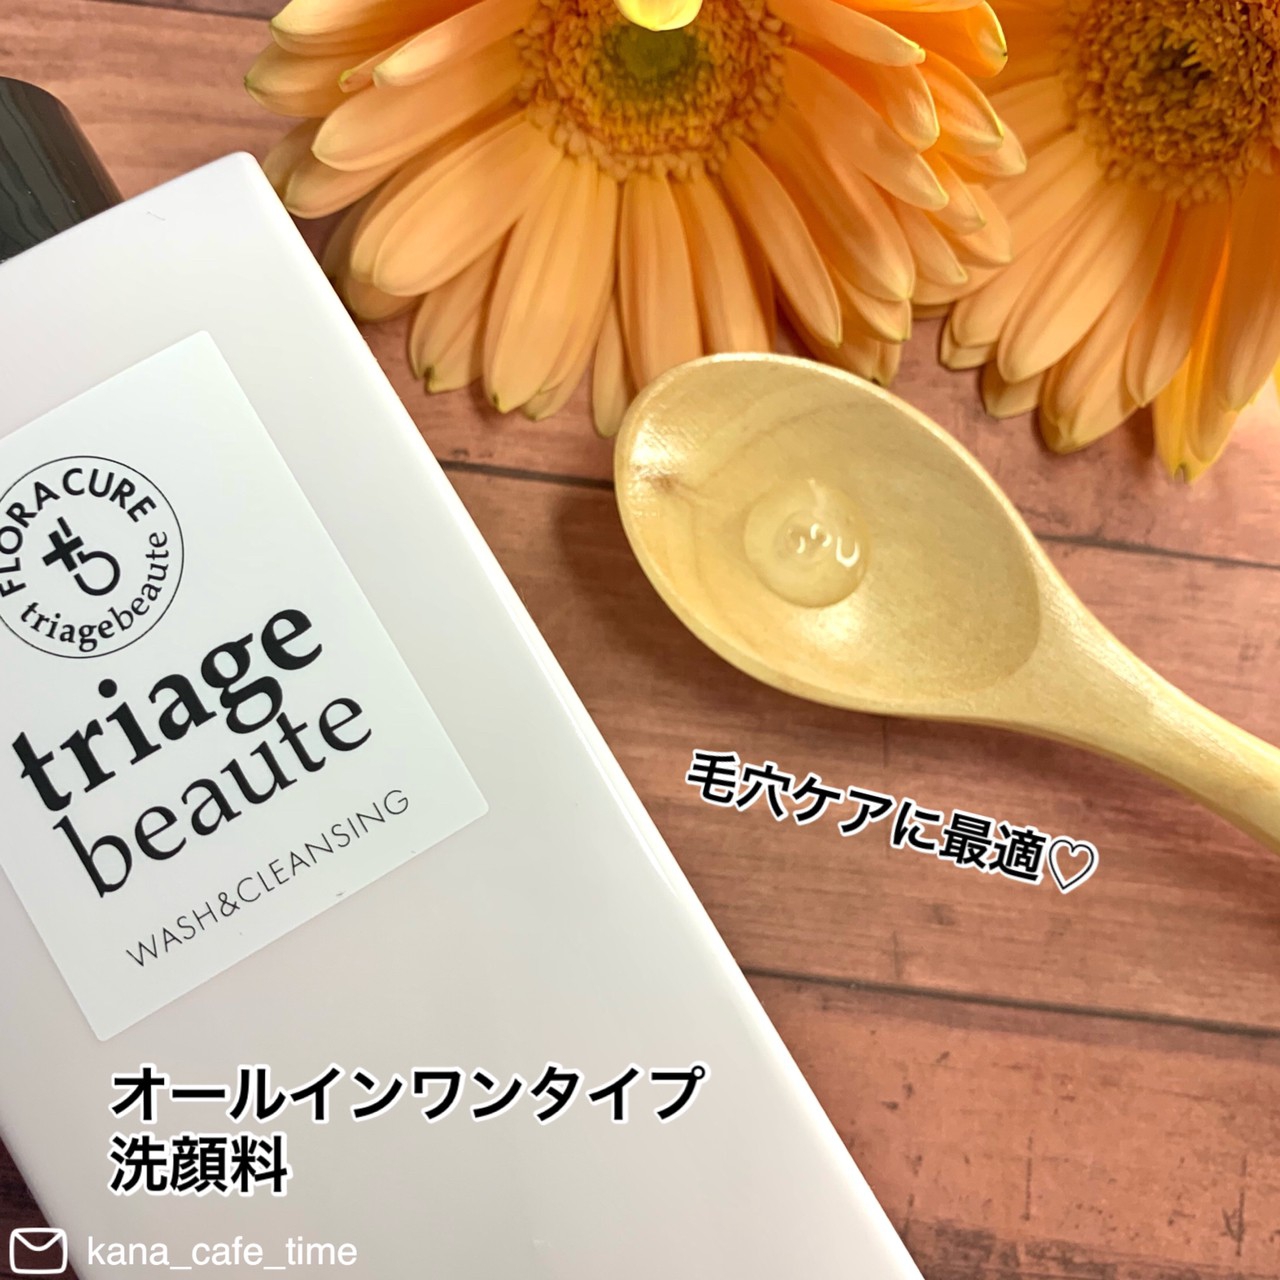 triagebeaute FLORA CURE WASH ＆ CLEANSINGを使ったkana_cafe_timeさんのクチコミ画像2